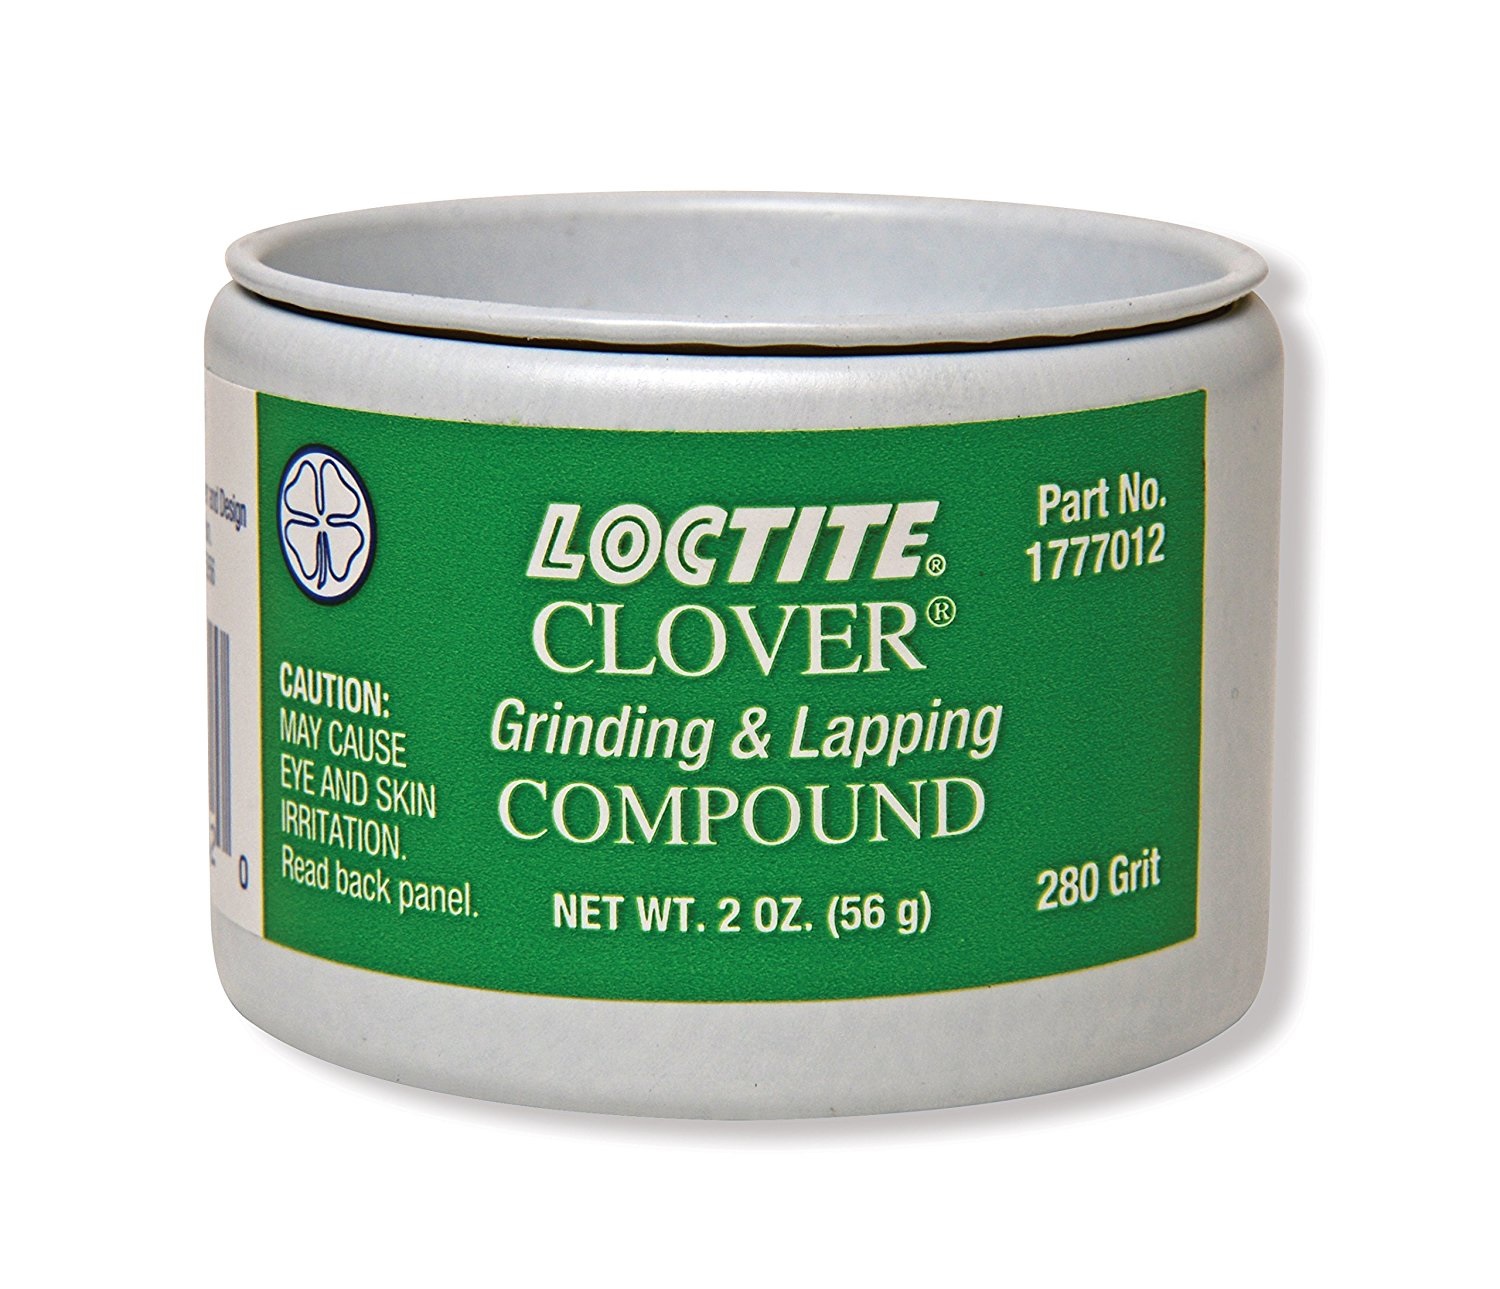 LOCTITE 1777012 CLOVER GRINDING AND LAPPING COMPOUND